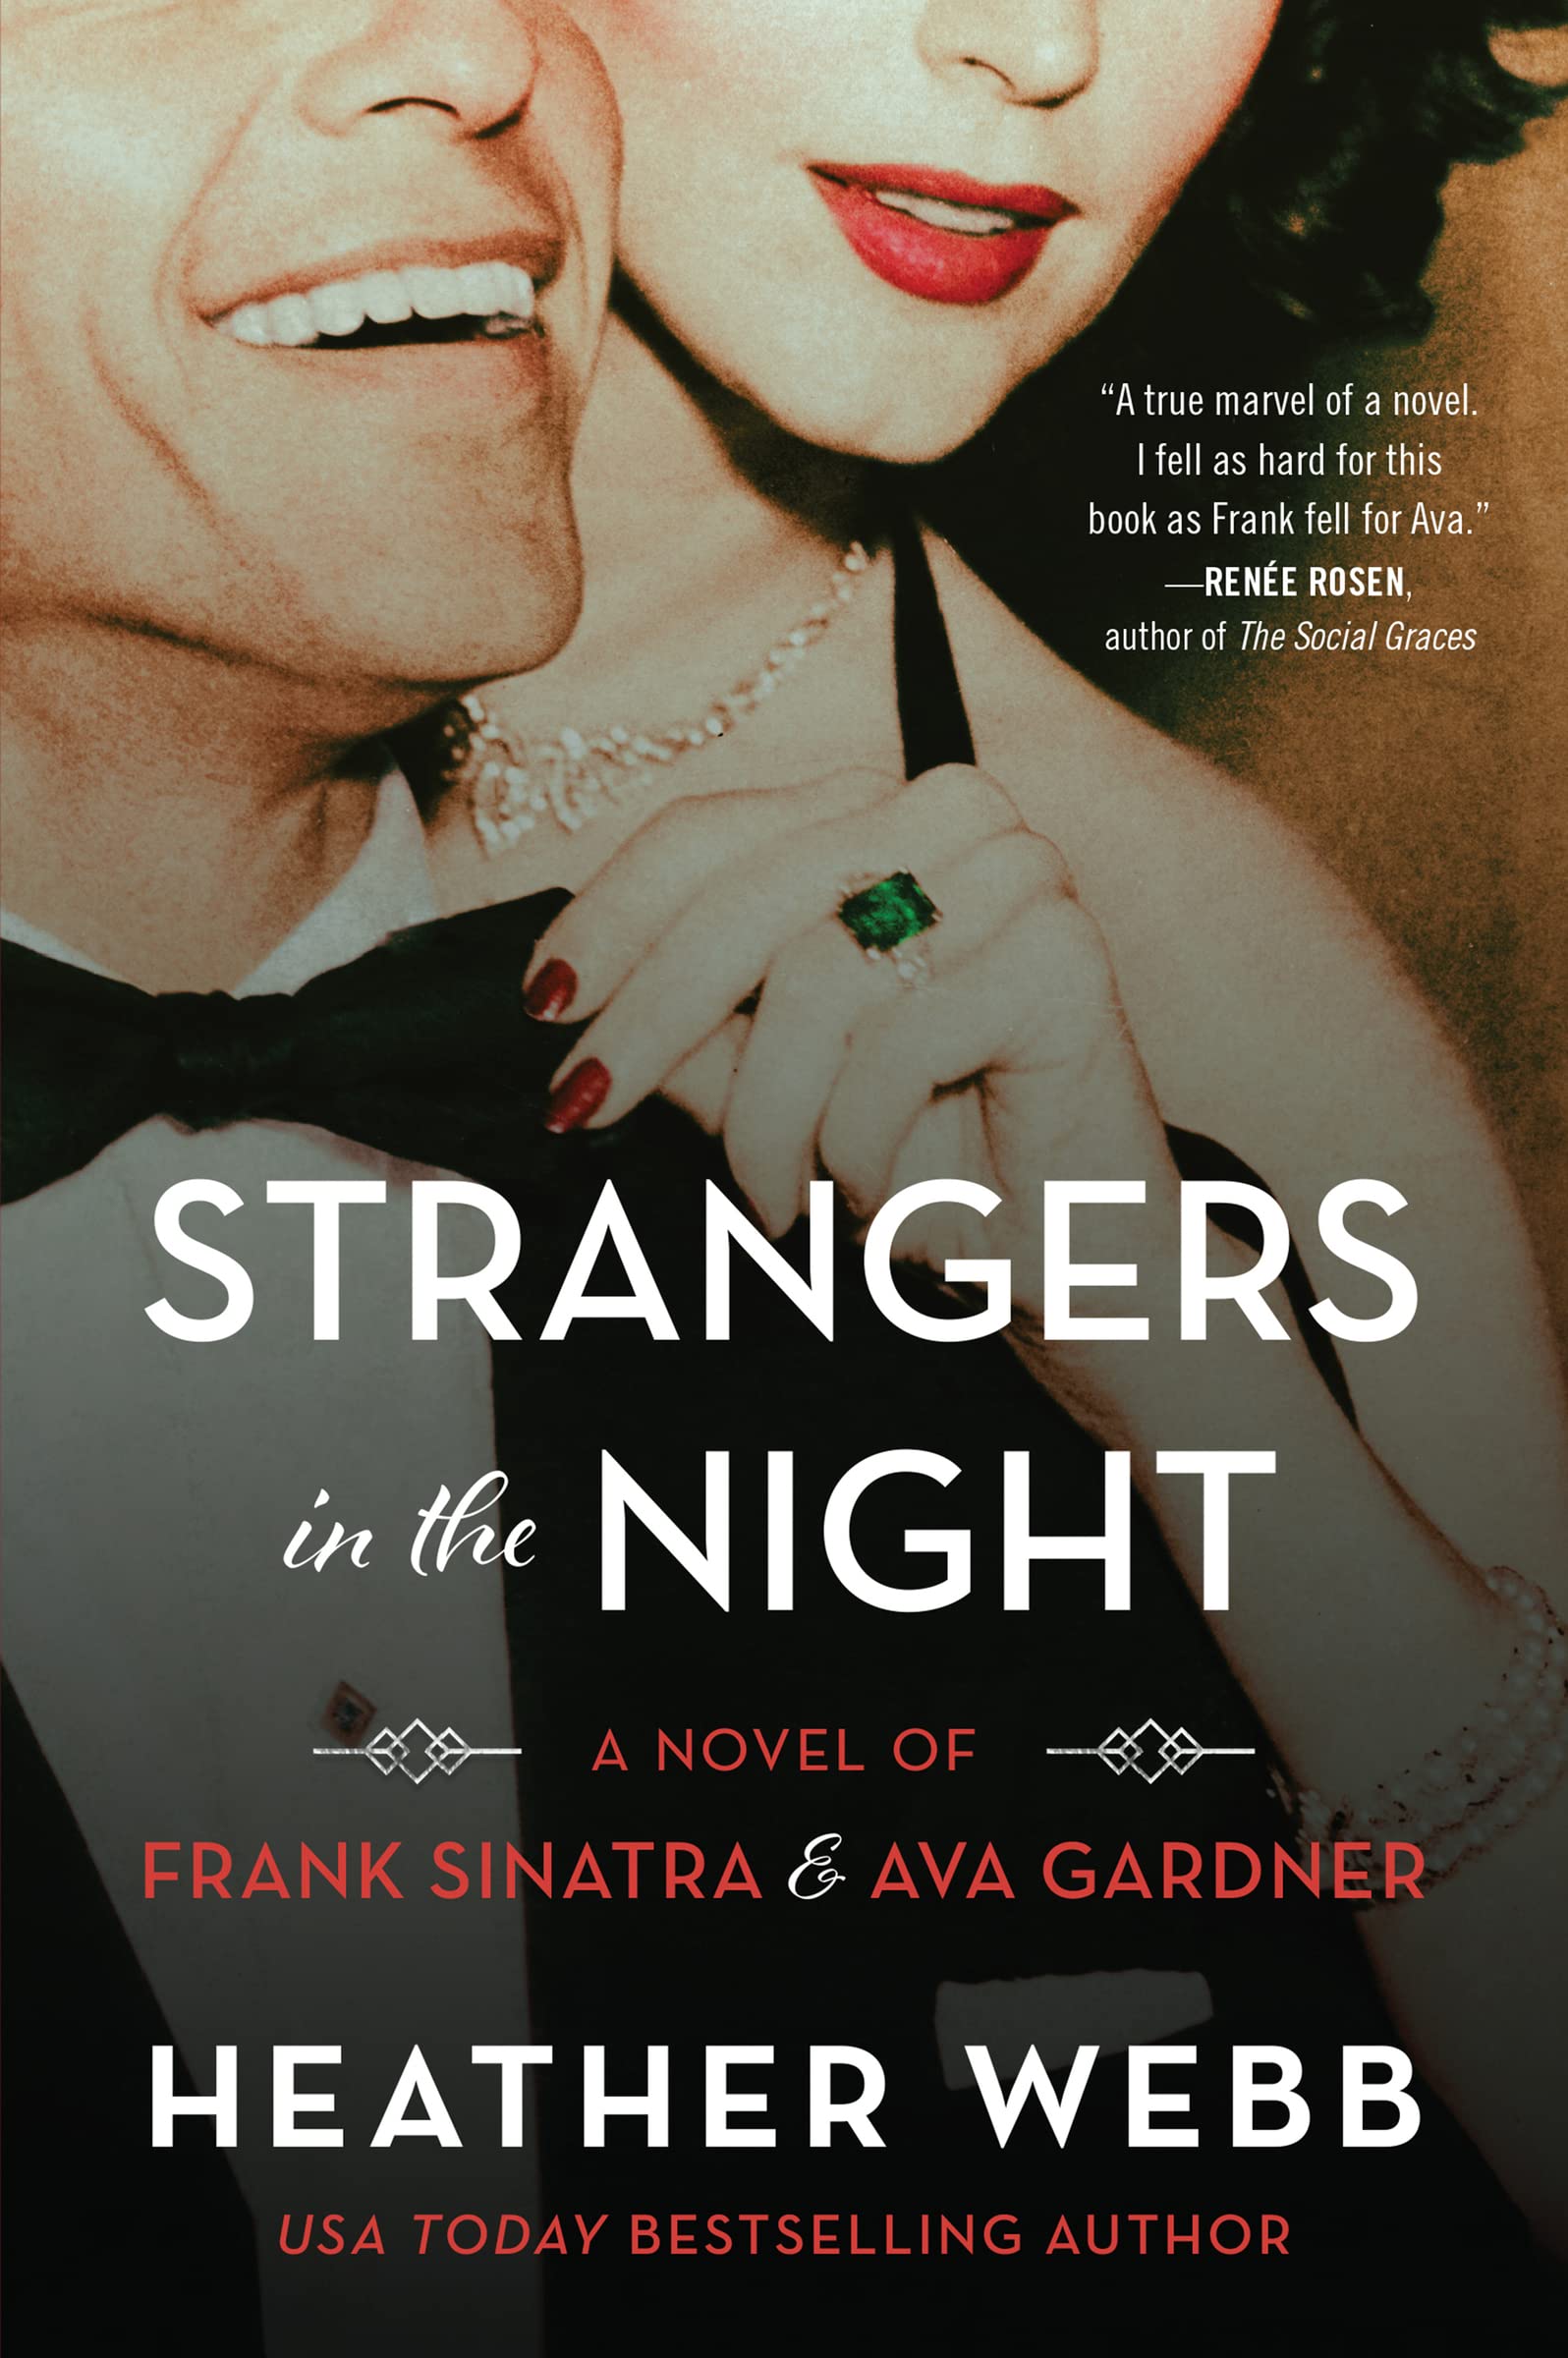 Image for "Strangers in the Night"